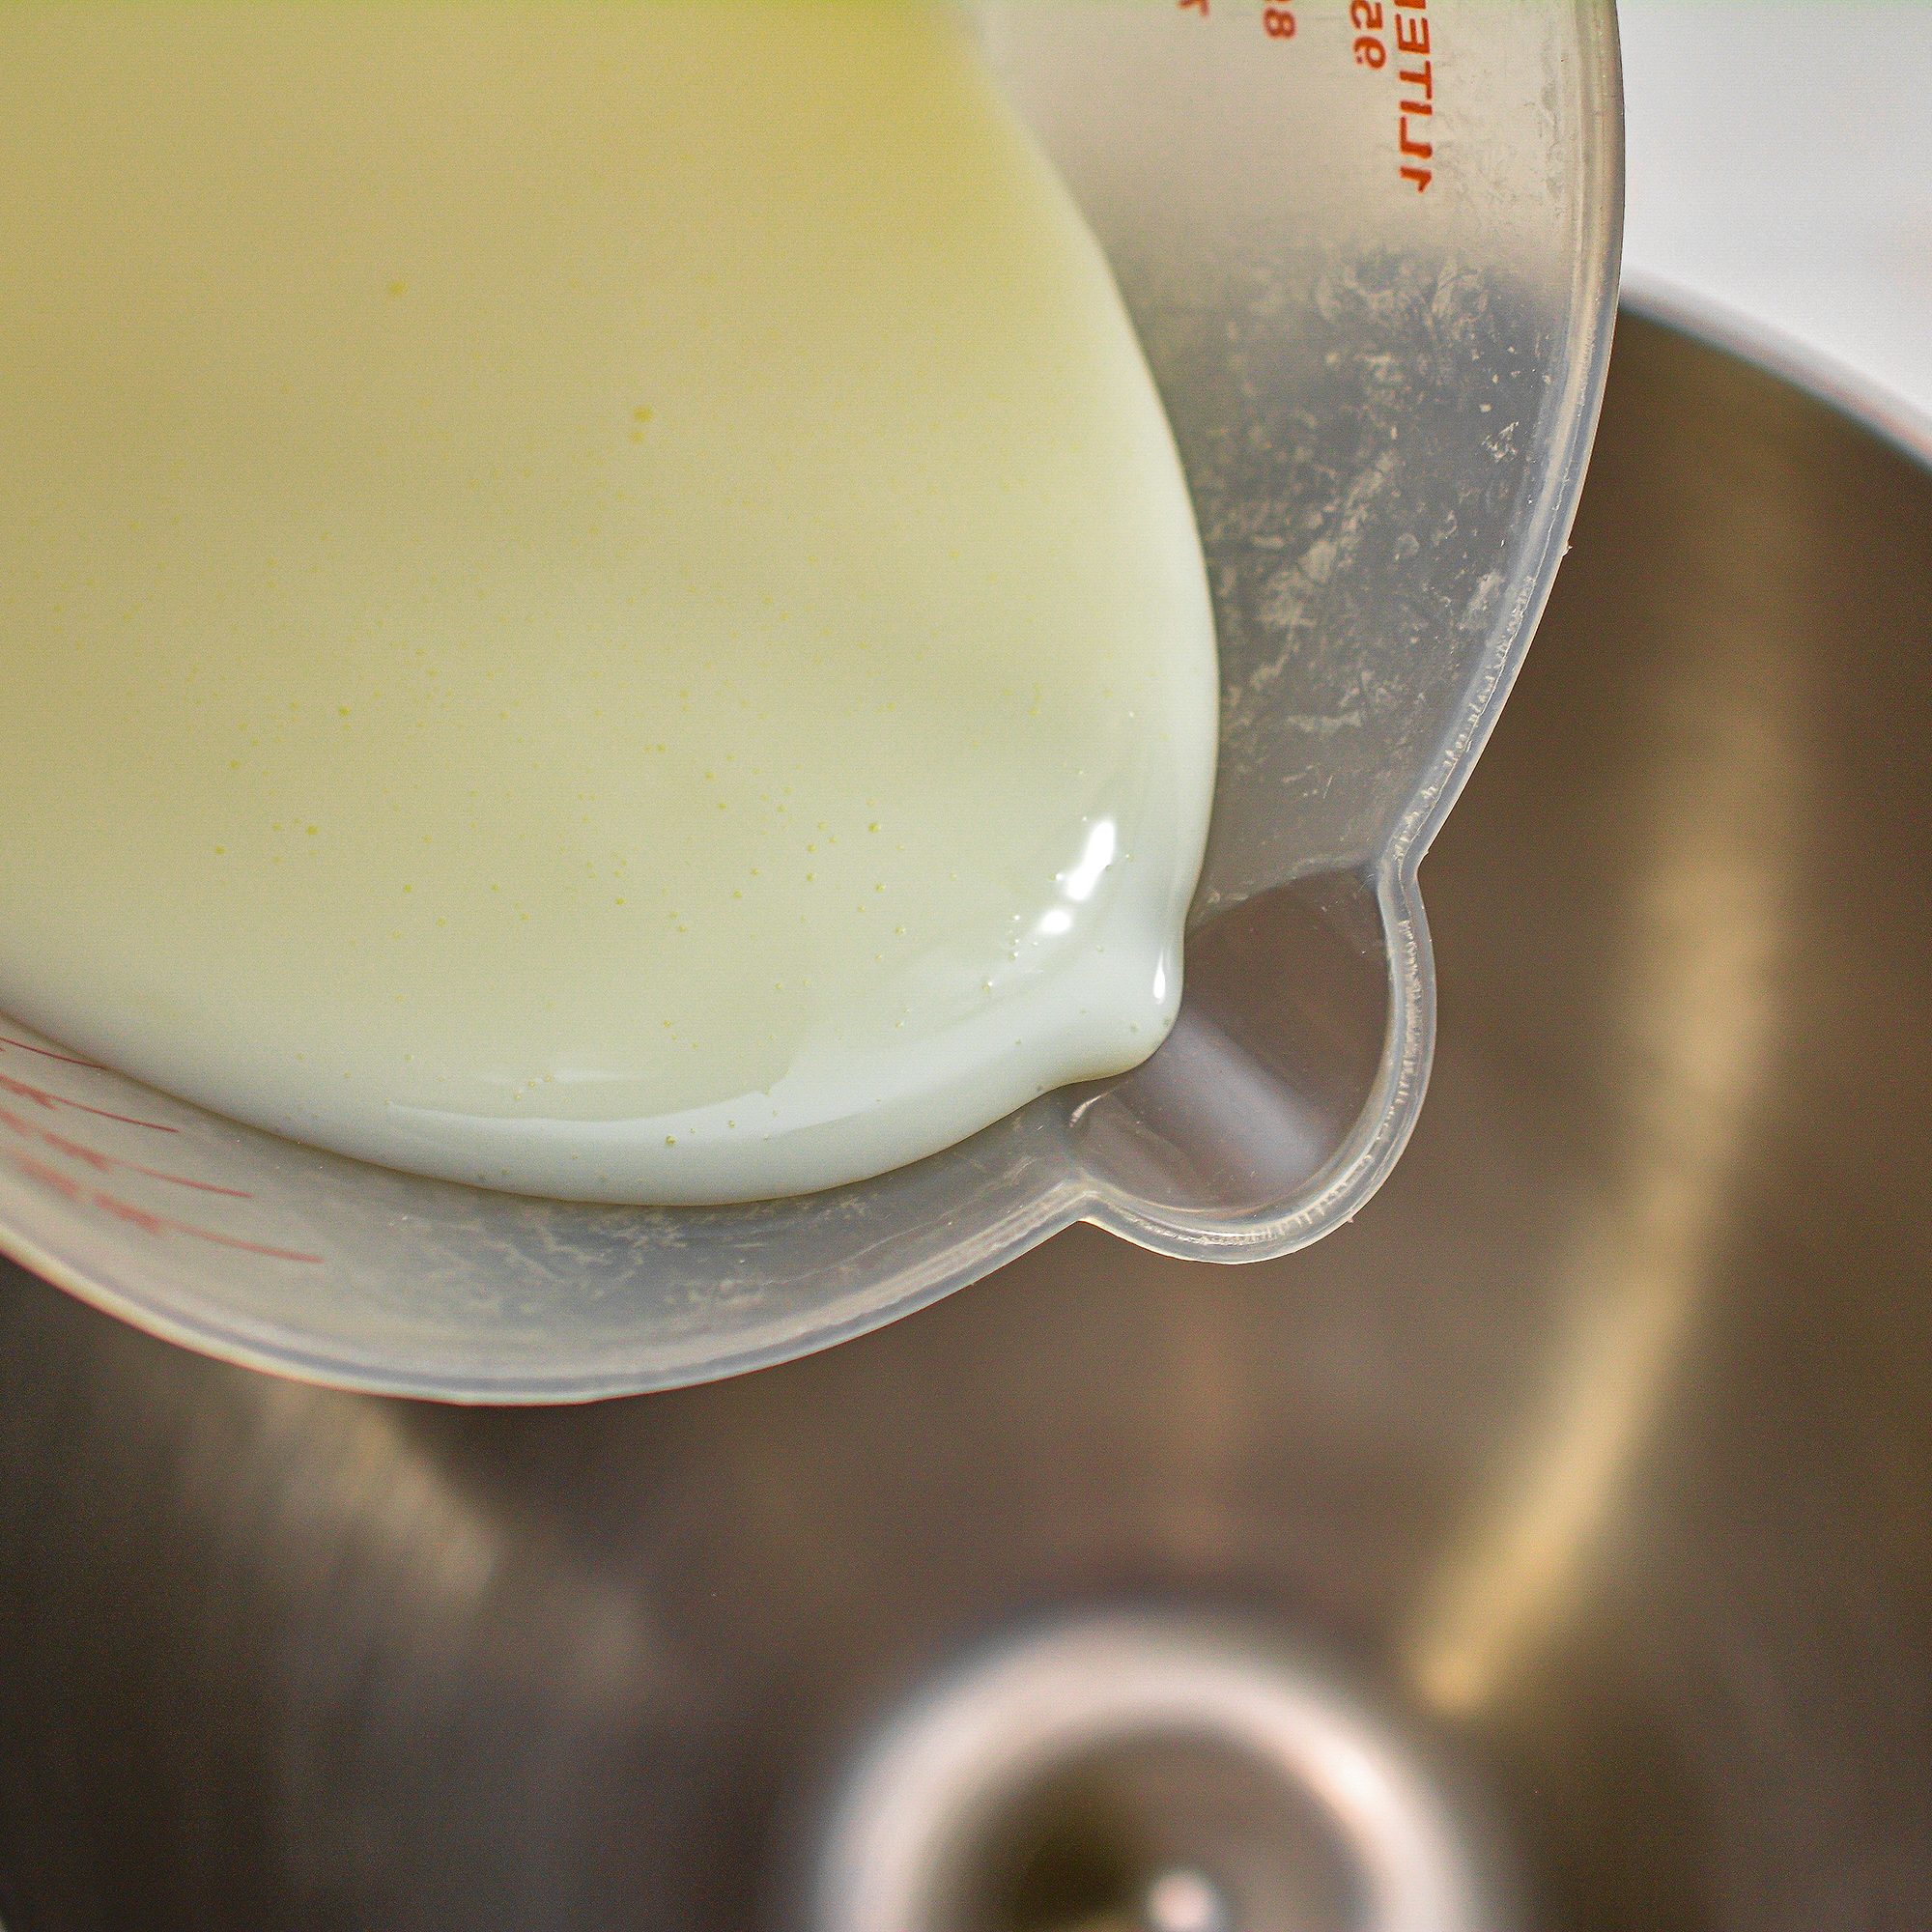 In a mixing bowl, combine the melted butter, eggs, sugar substitute, buttermilk, baking soda, cornmeal, flour and salt until a smooth batter has formed.